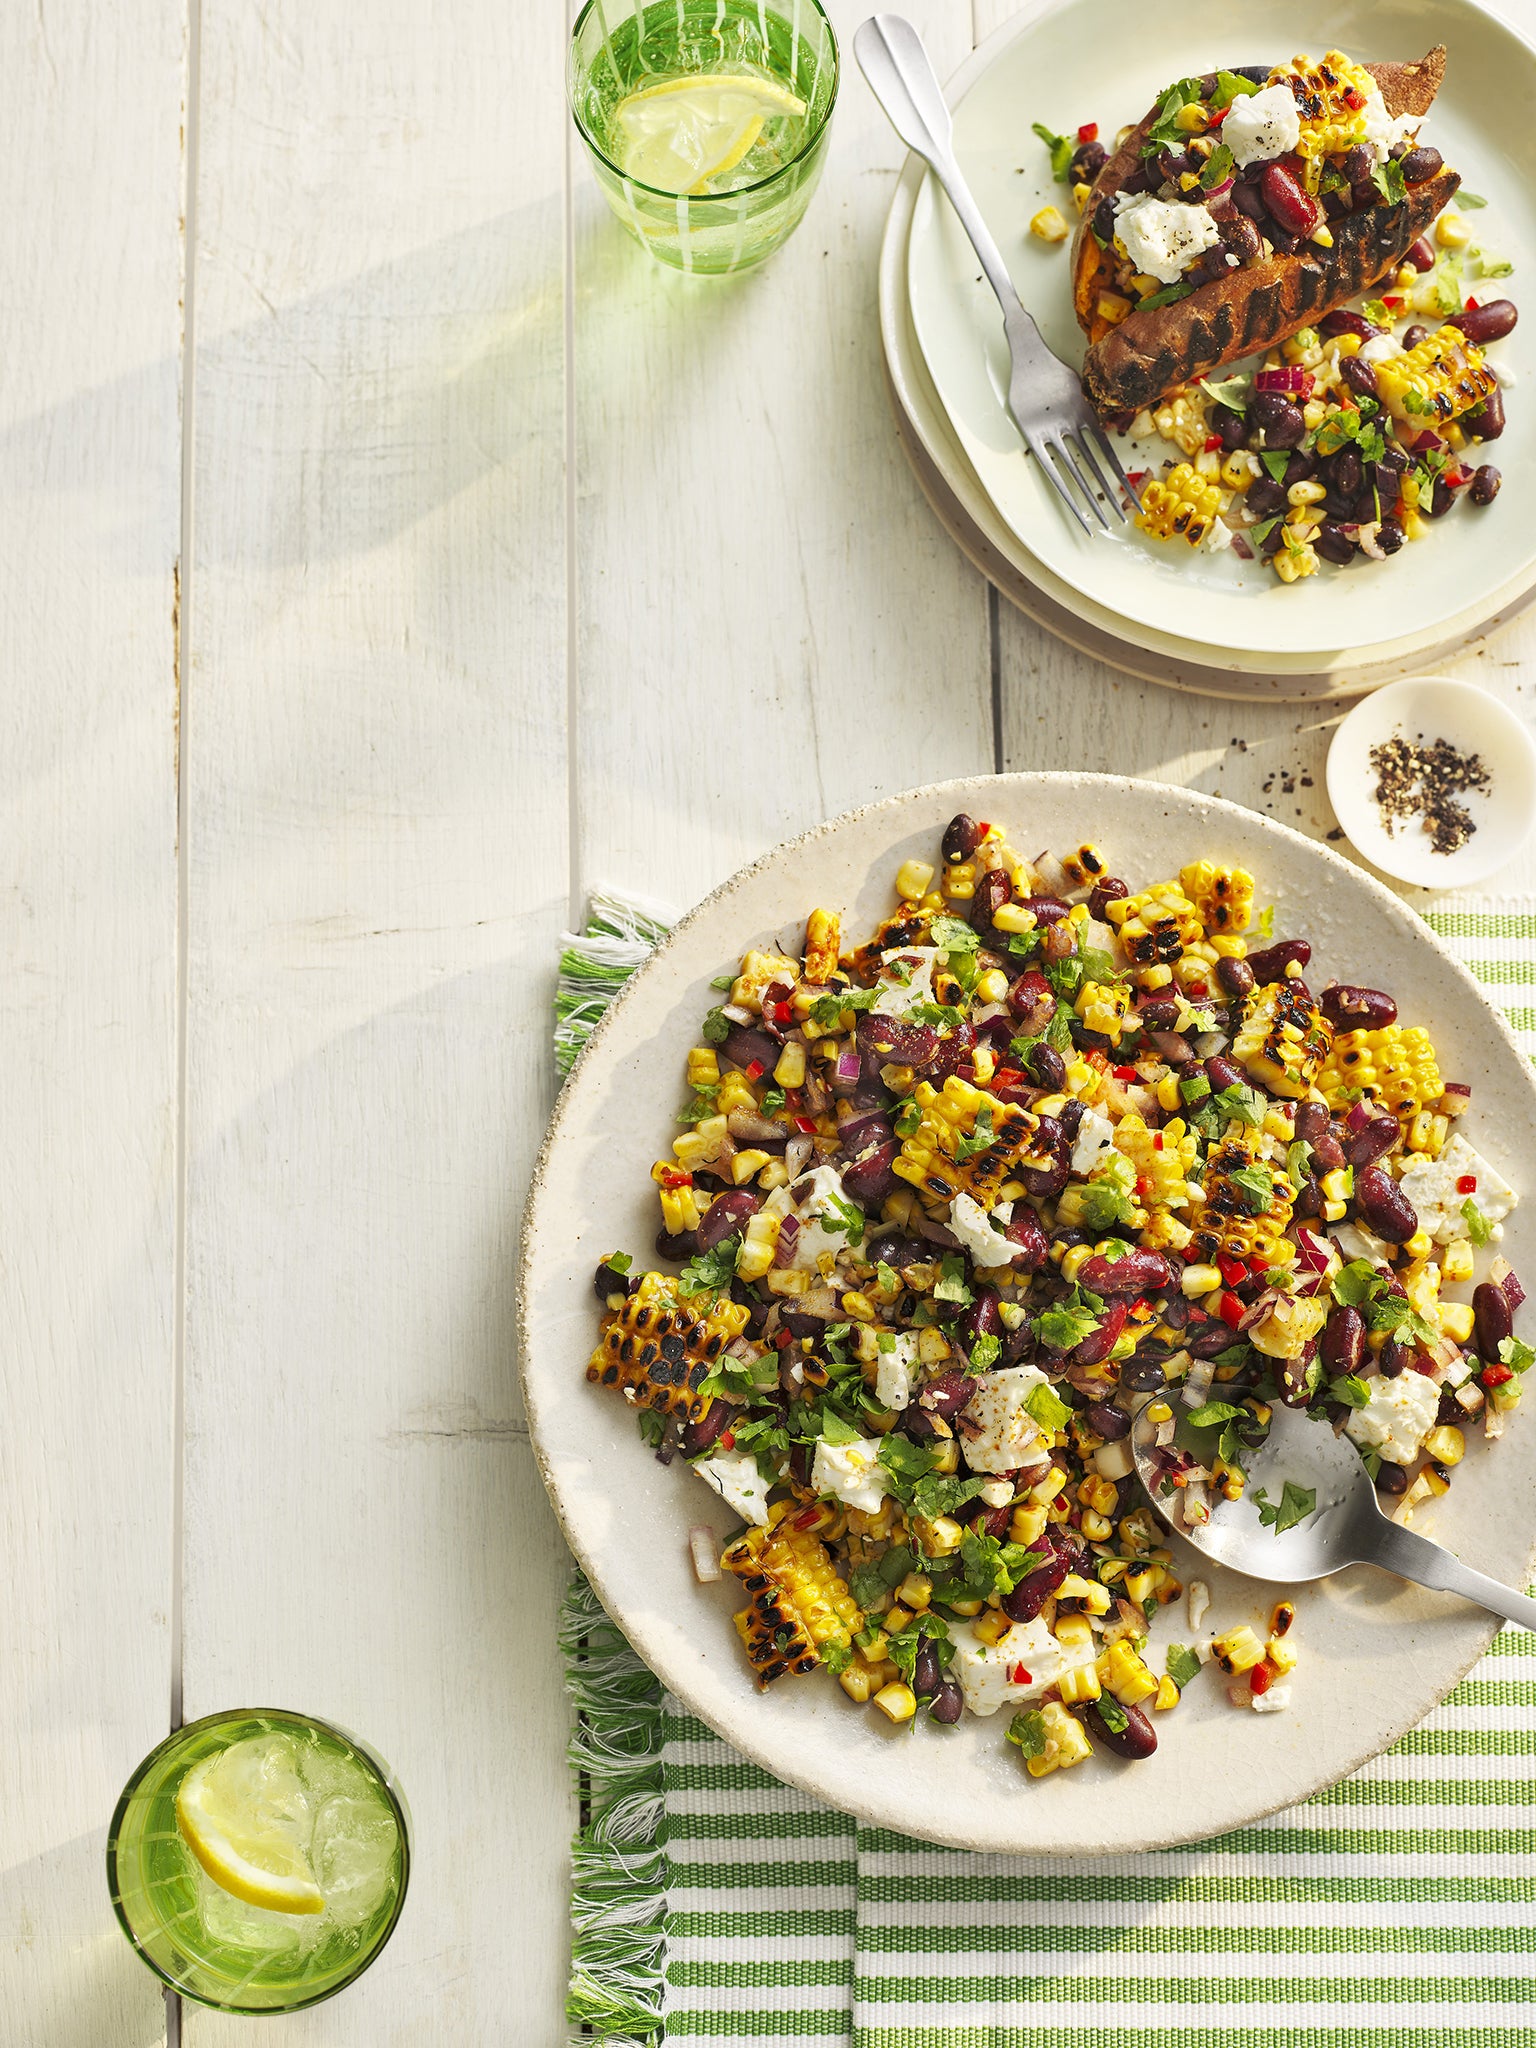 Make the most of your grill to char the corn and enhance the flavor of your salad